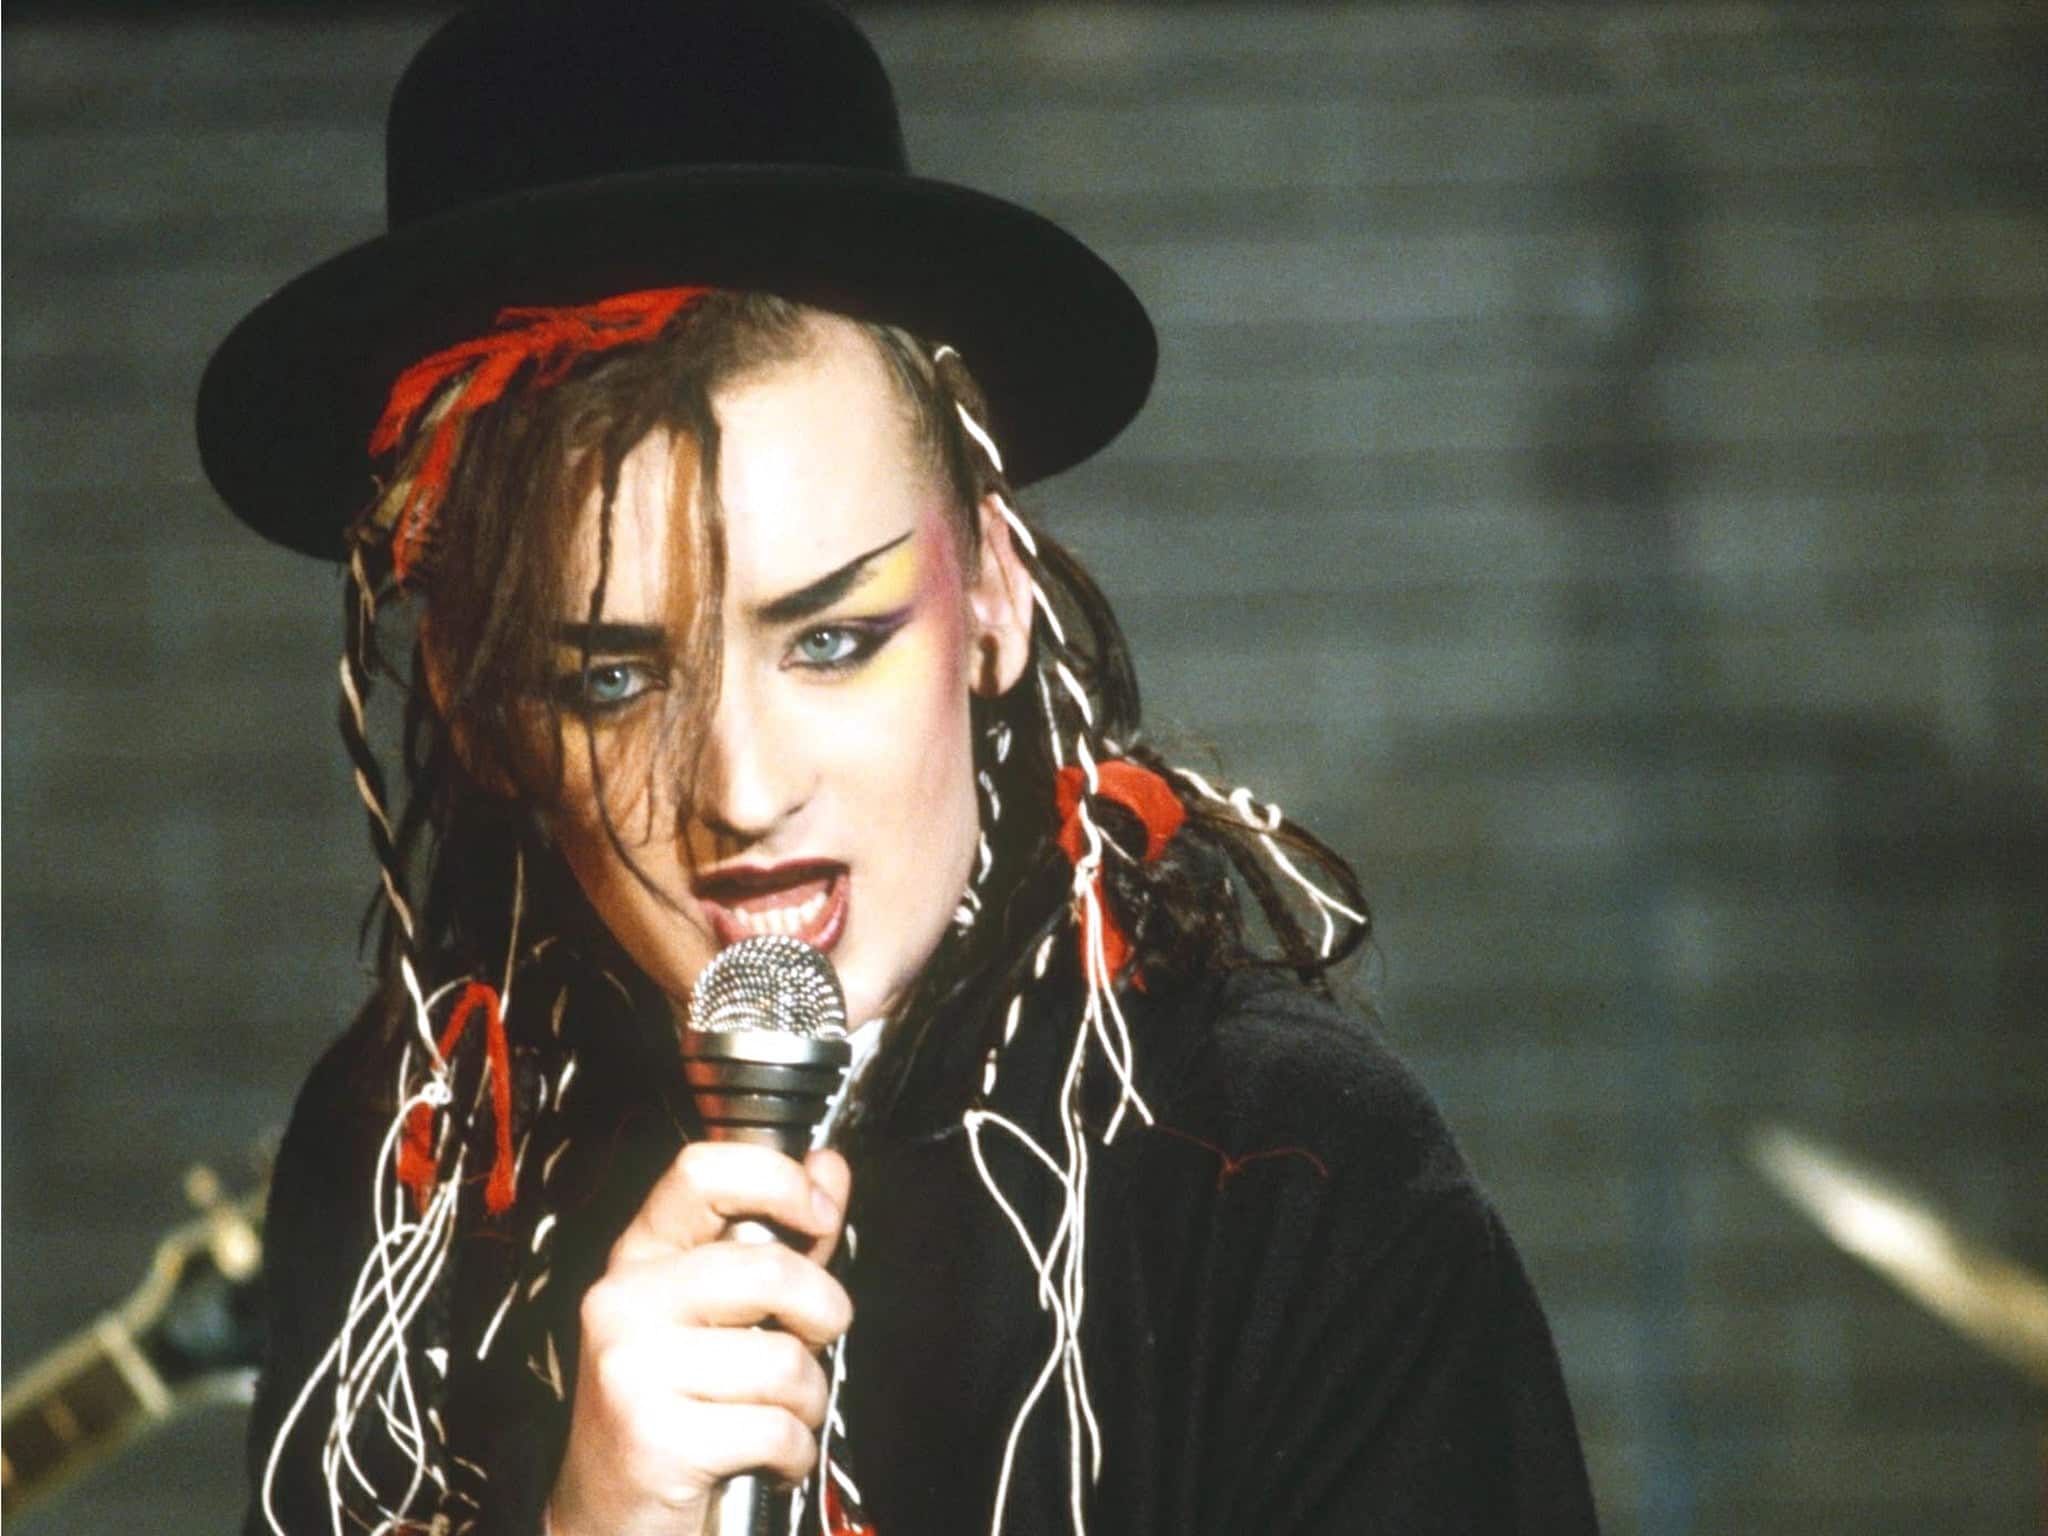 Exotic, colourful and perhaps ahead of his time Boy George